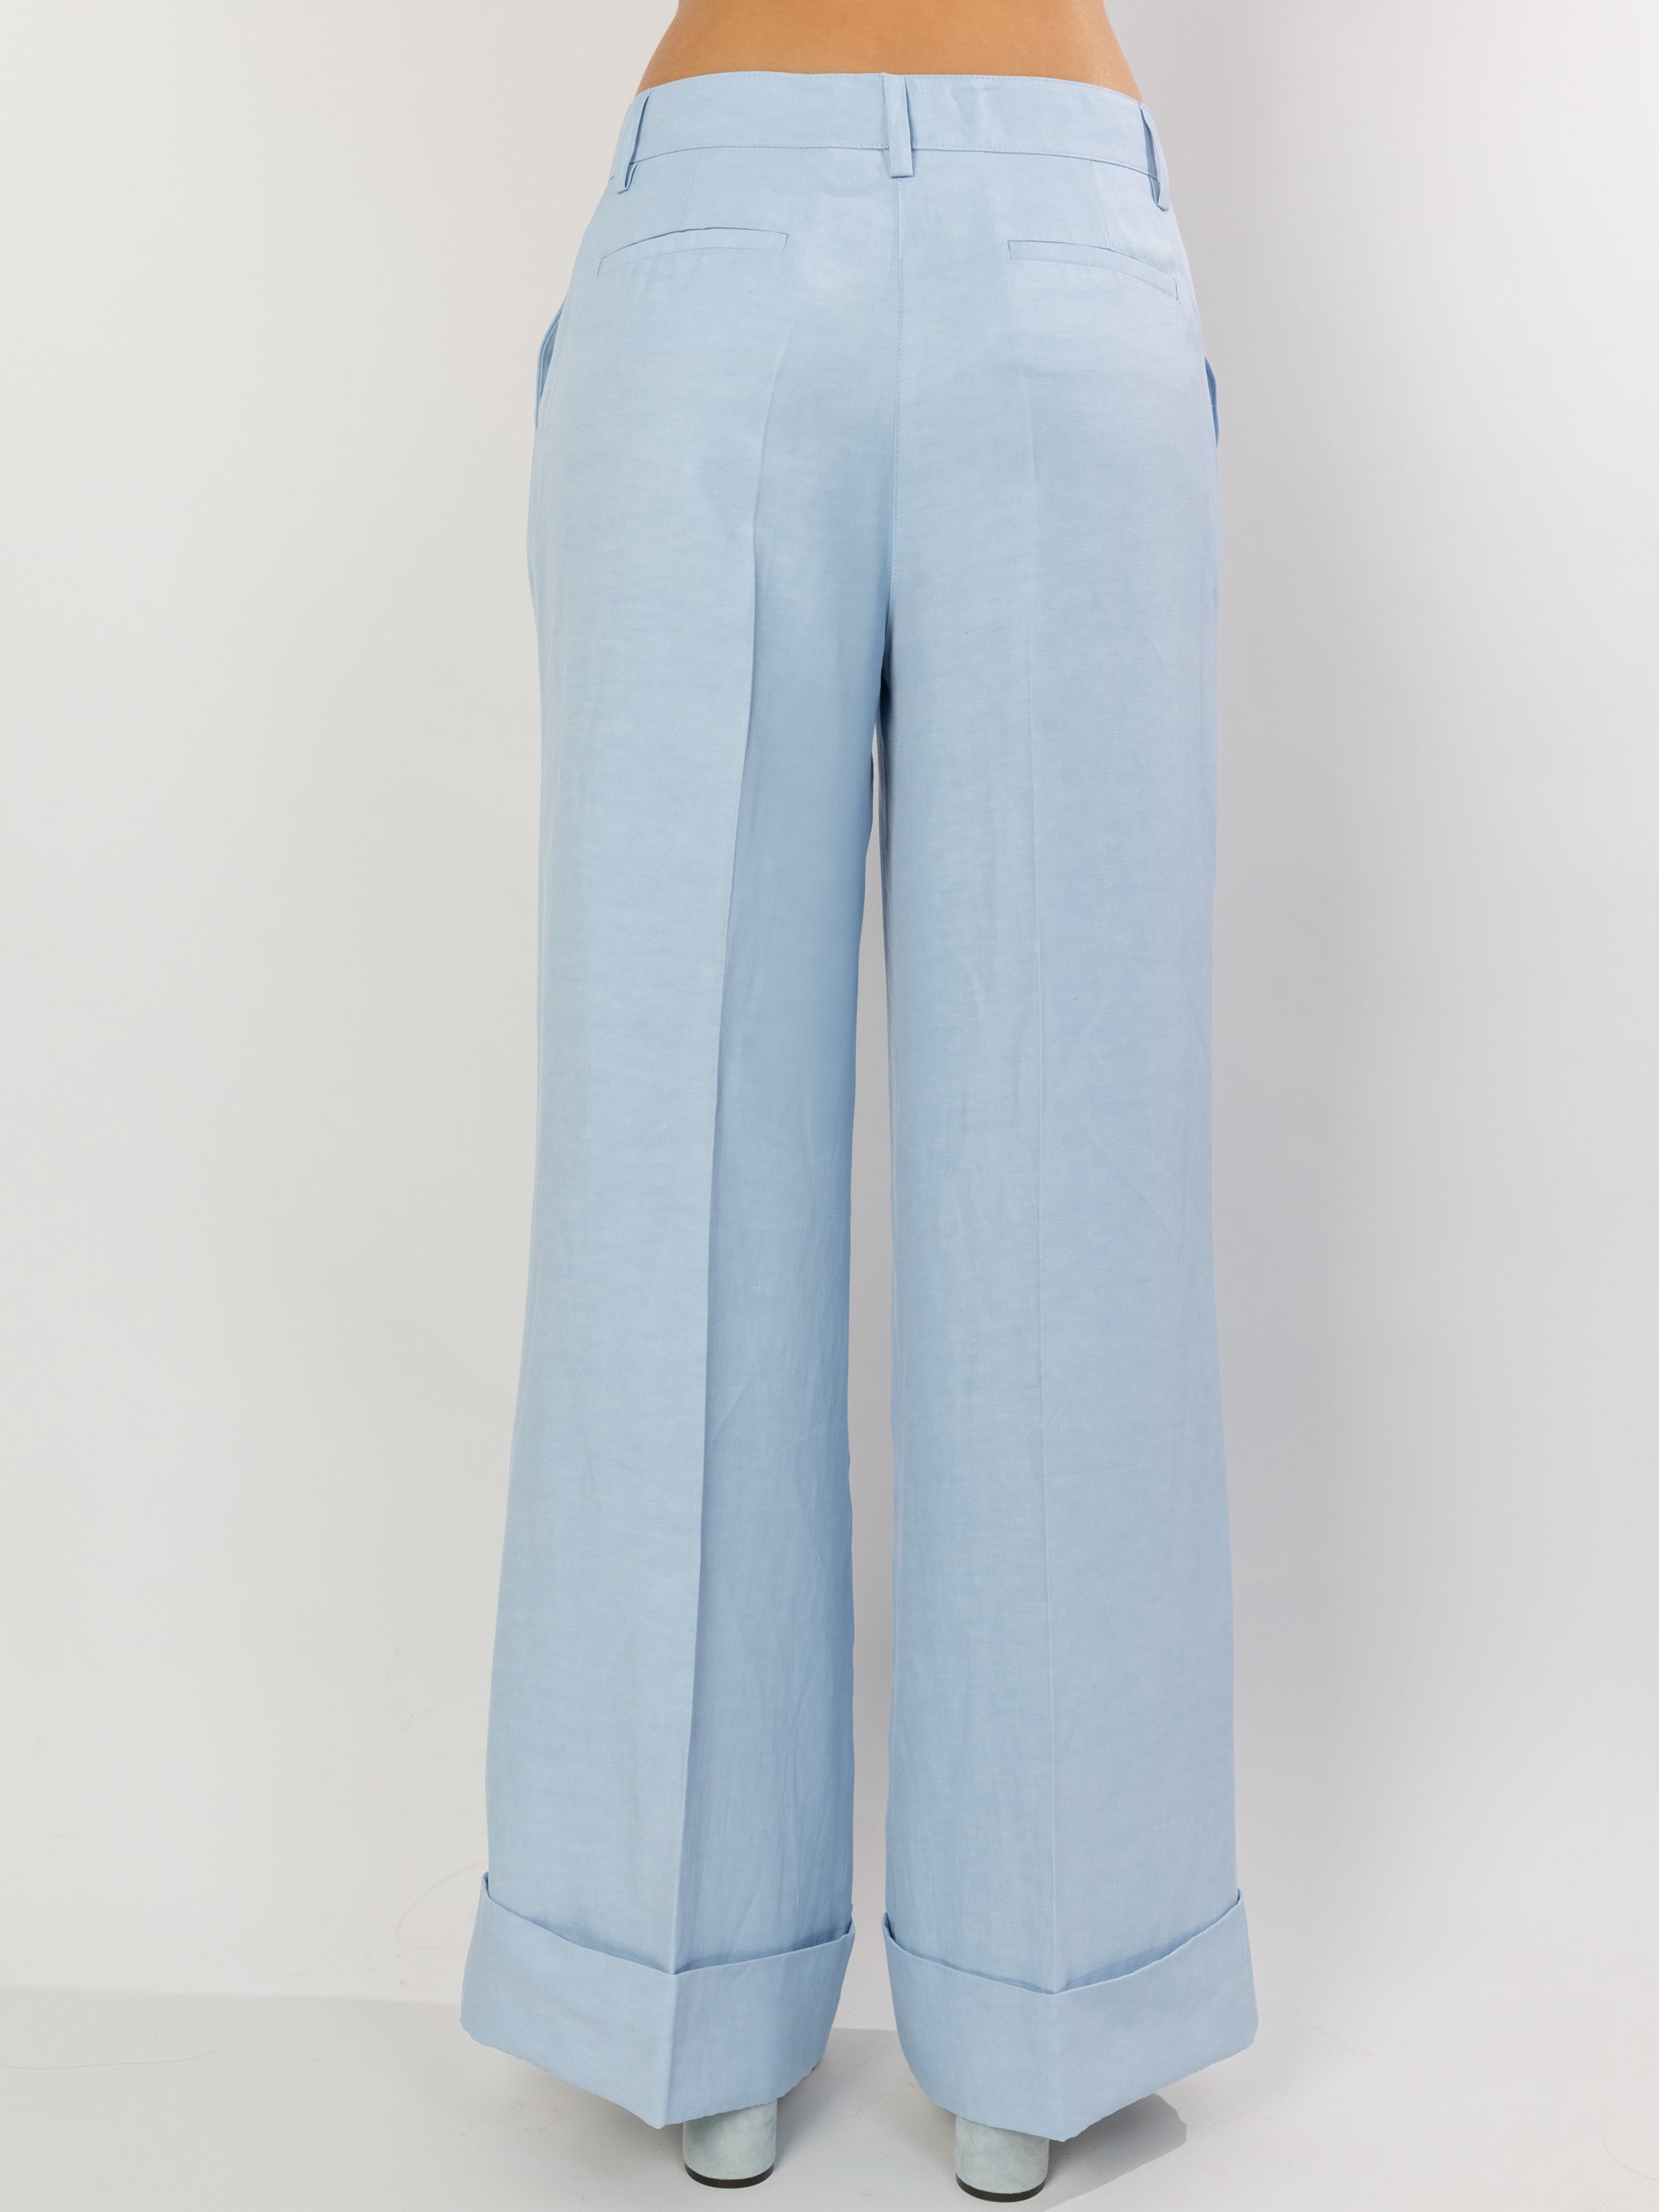 Palazzo Trousers in Linen with Powder Blue Cuff